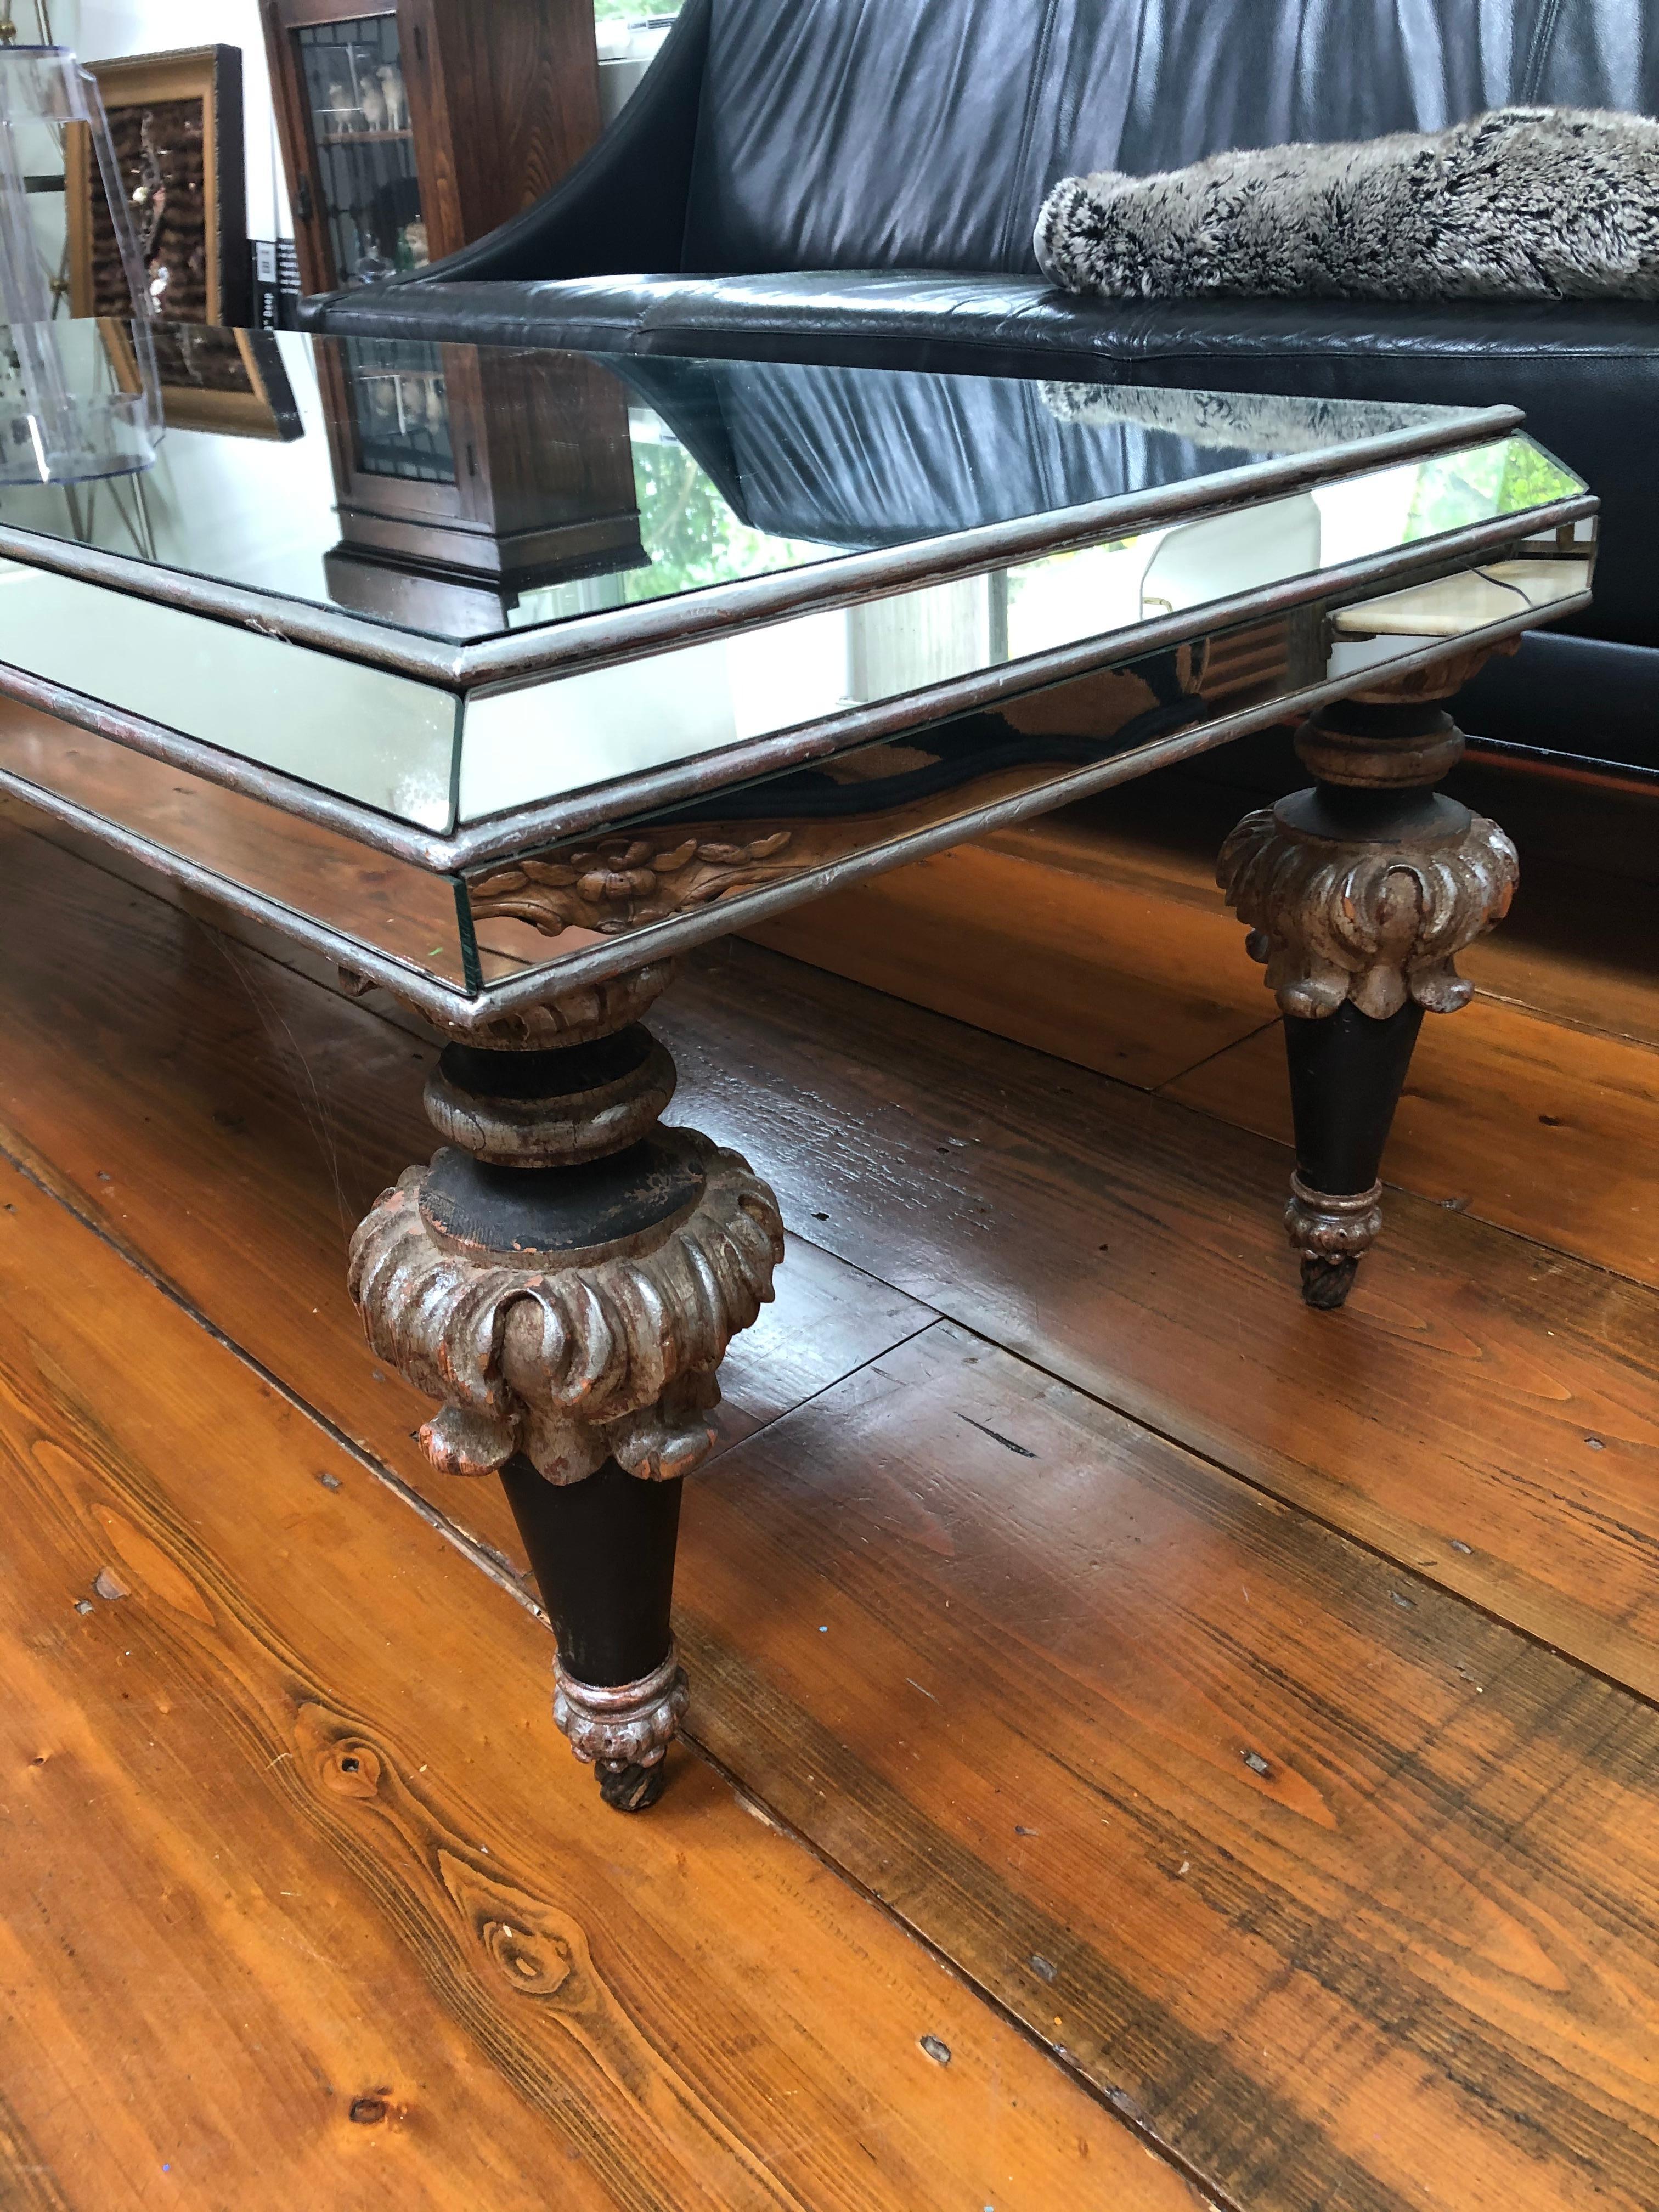 French Glamorous Vintage Mirrored Coffeetable with Splendid Fancy Carved Wood Legs